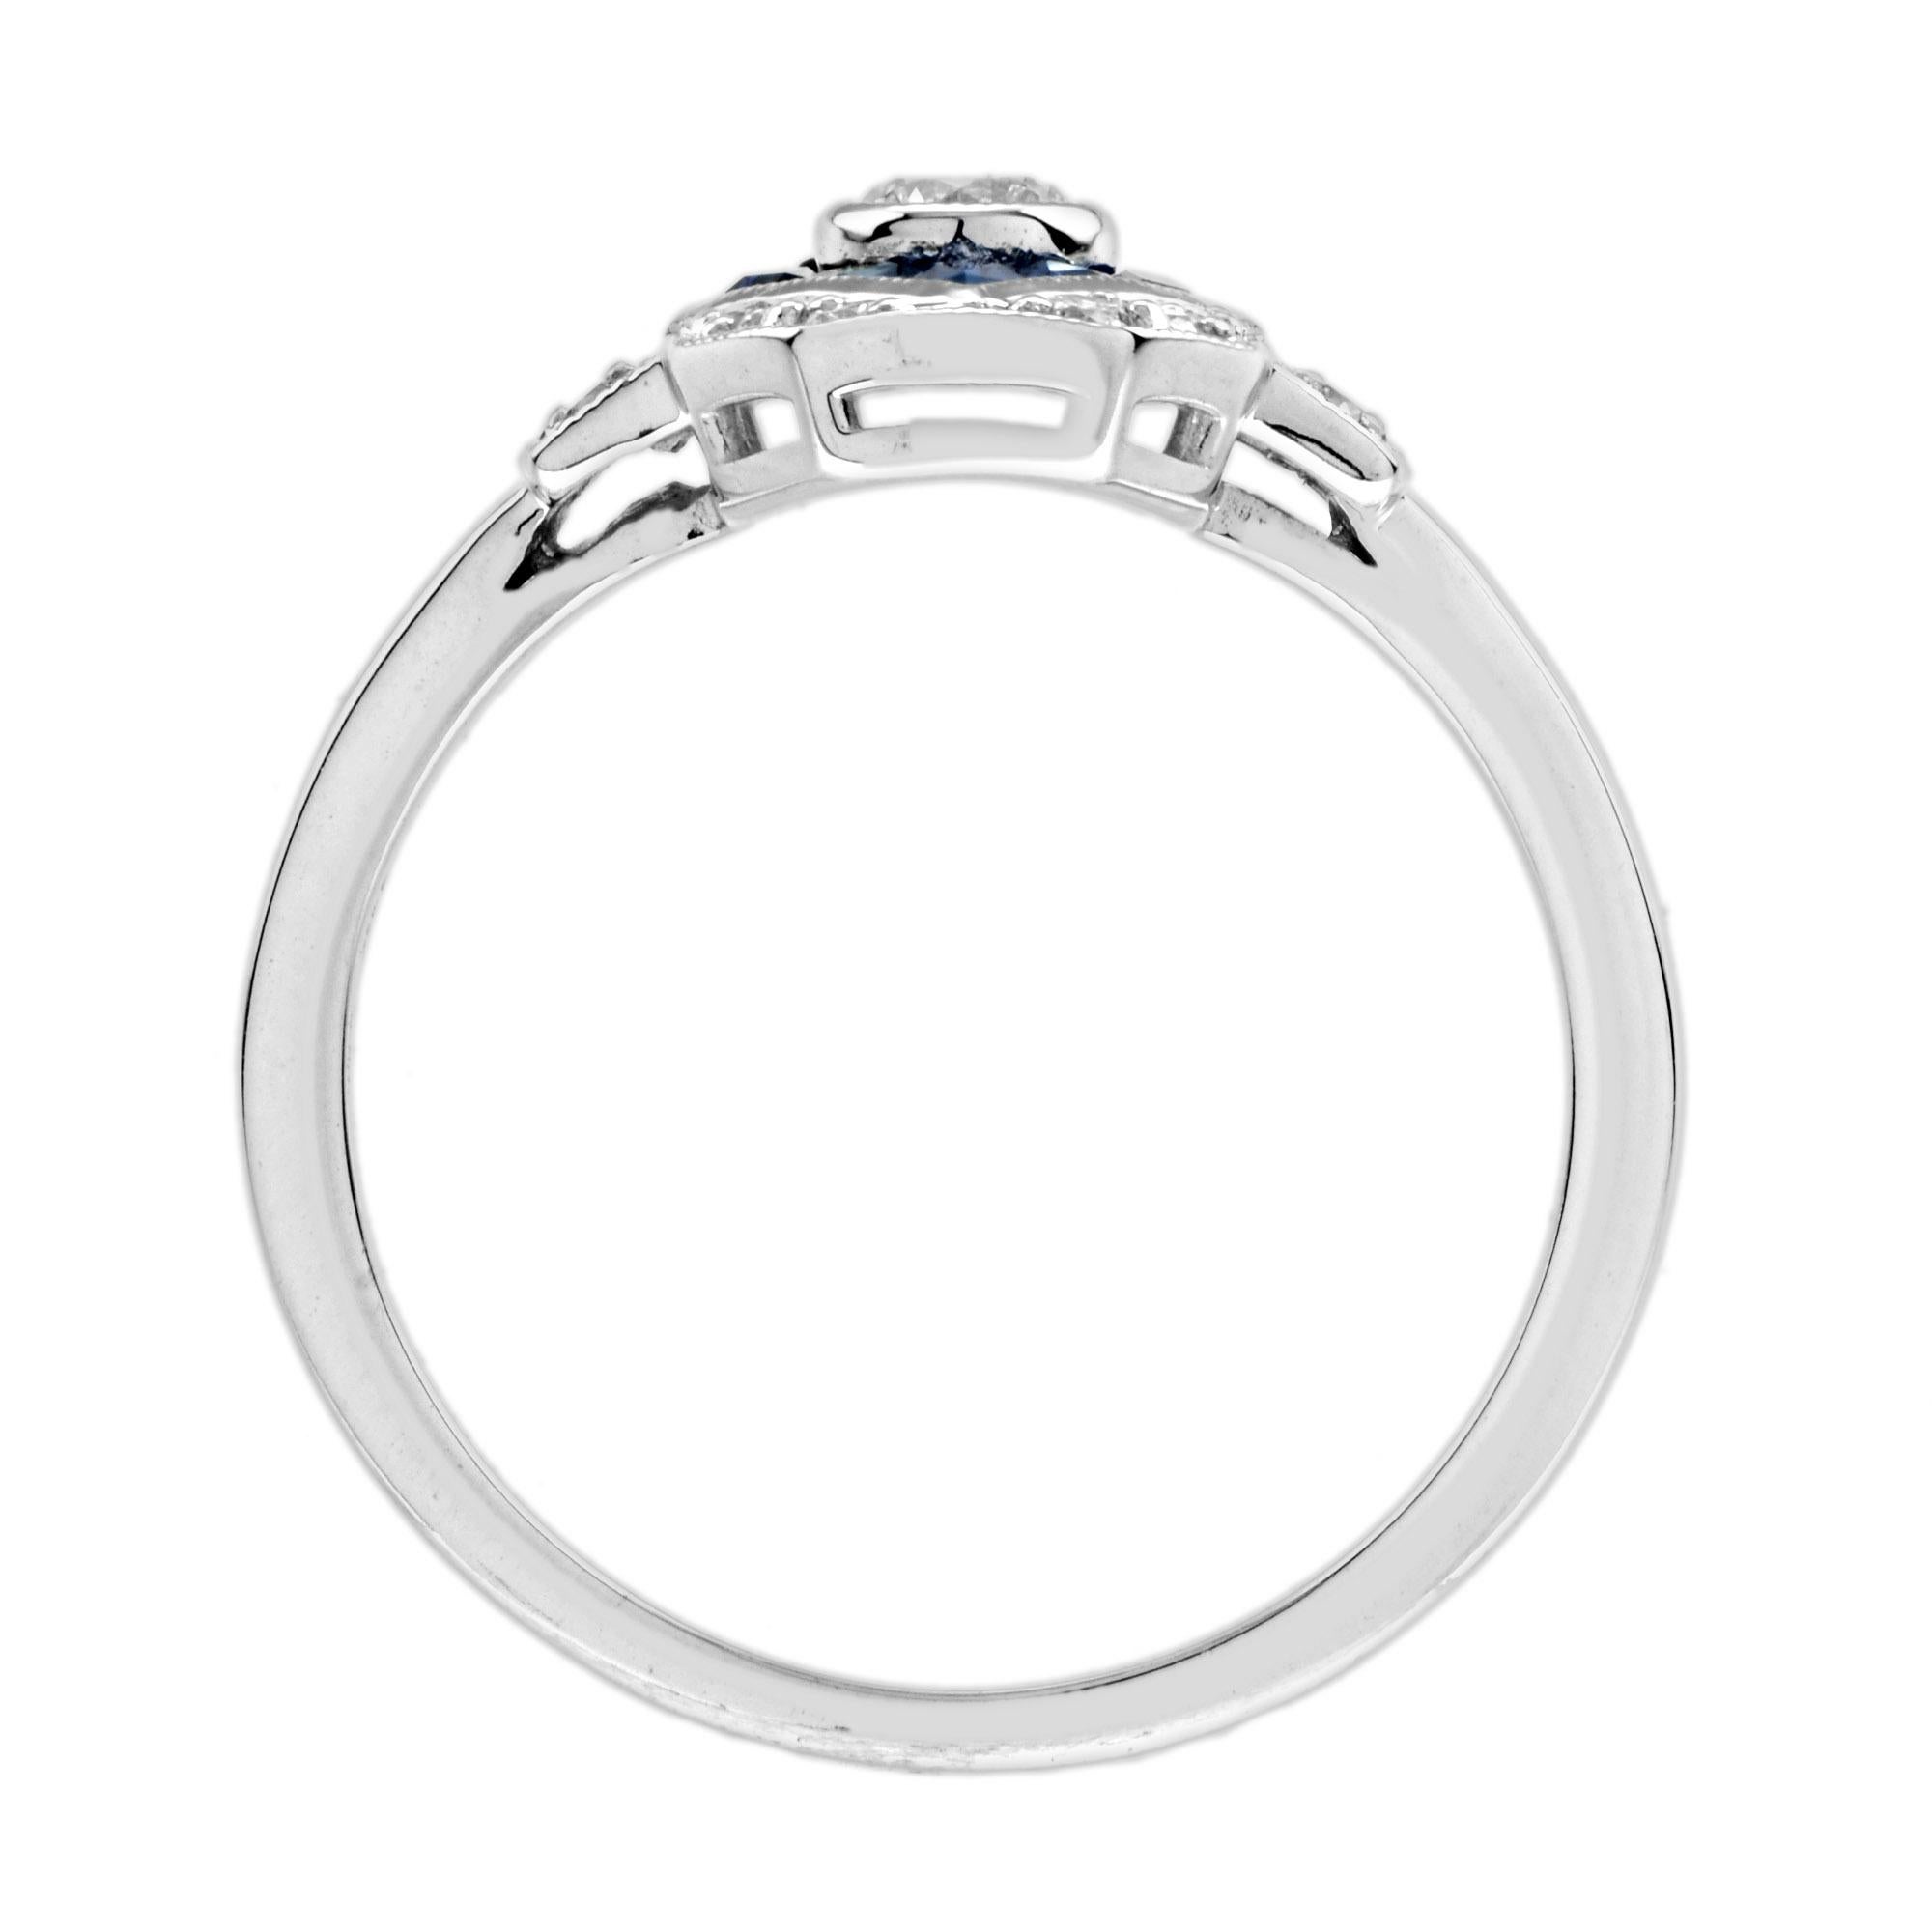 Diamond and Blue Sapphire Art Deco Style Engagement Ring in 14k White Gold For Sale 2